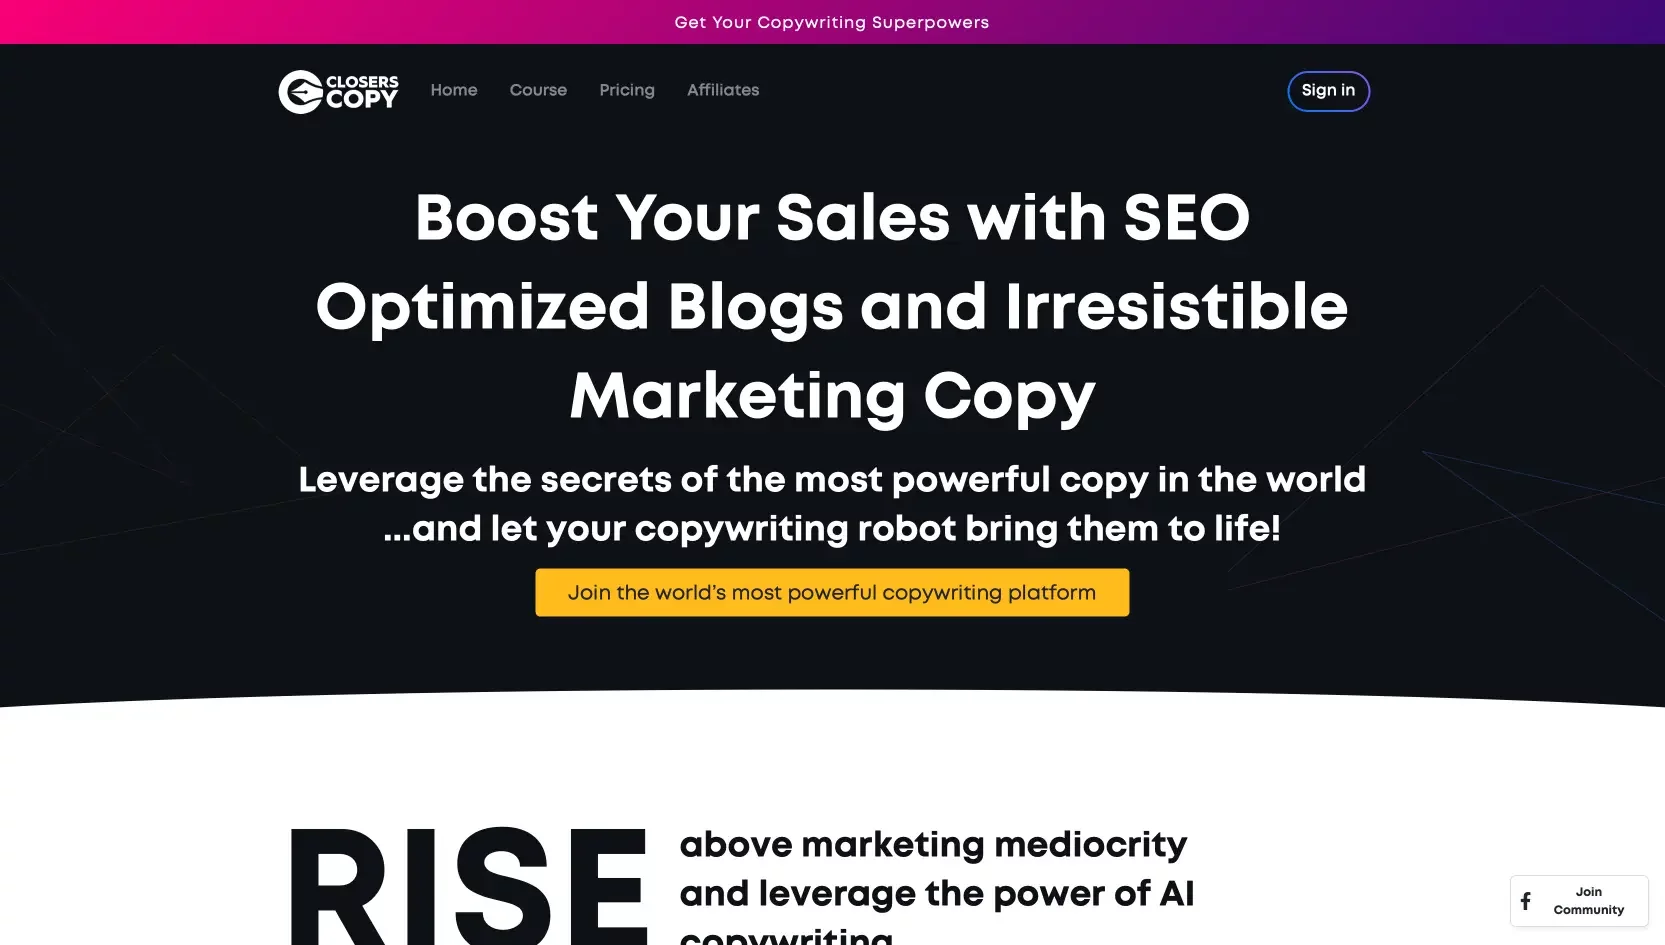  Unlock the power of SEO & copywriting to boost